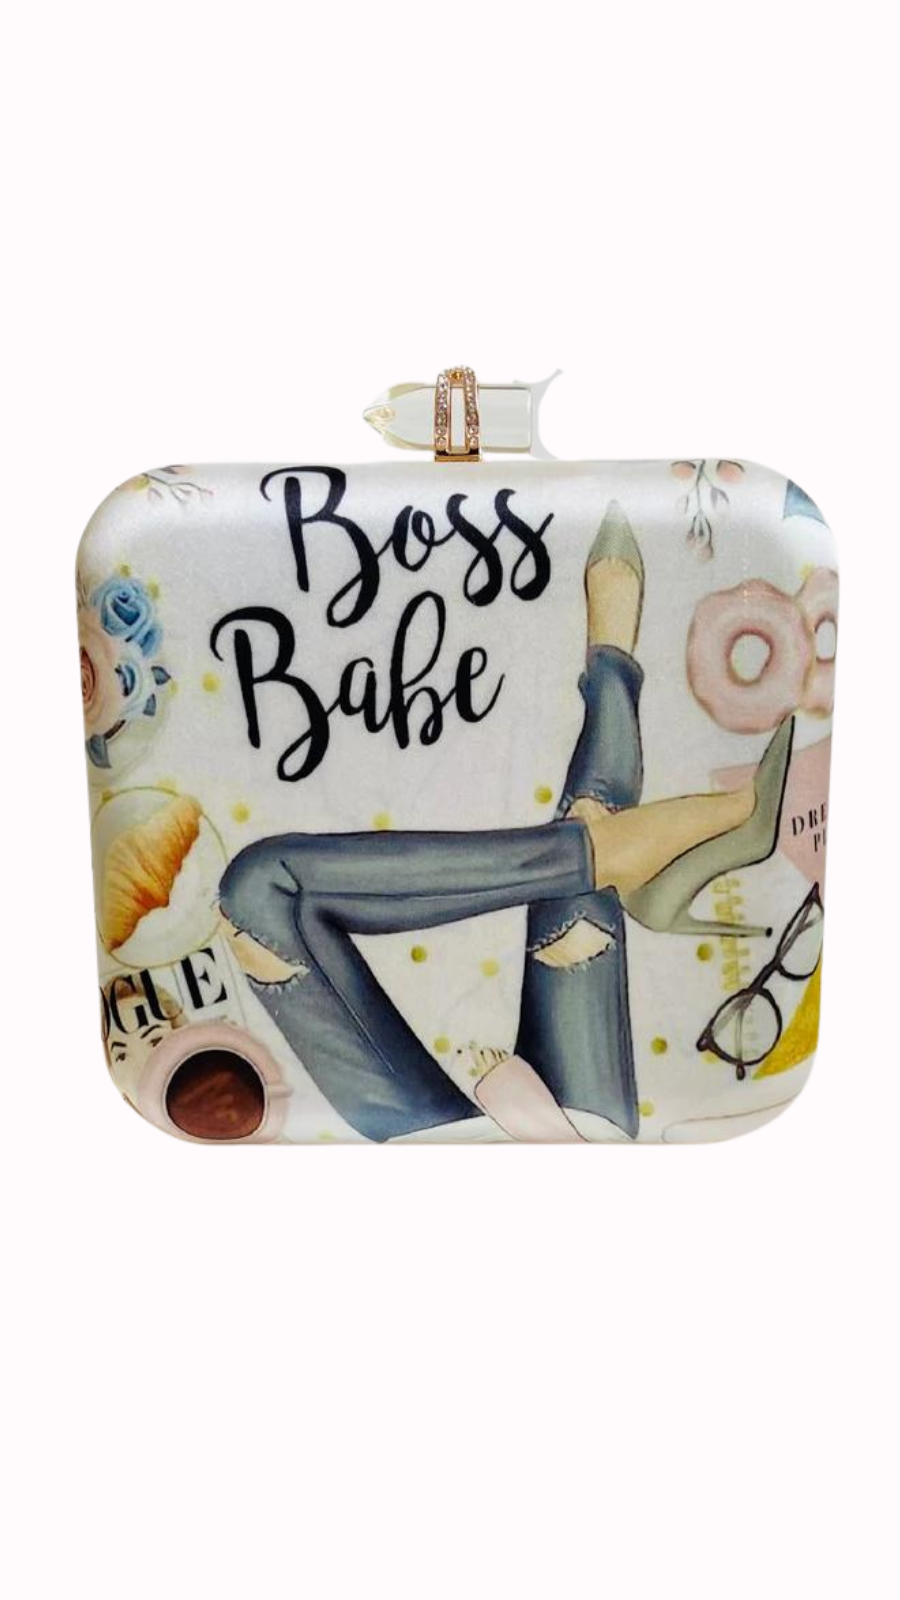 BOSS BABE, a product by Clutcheeet